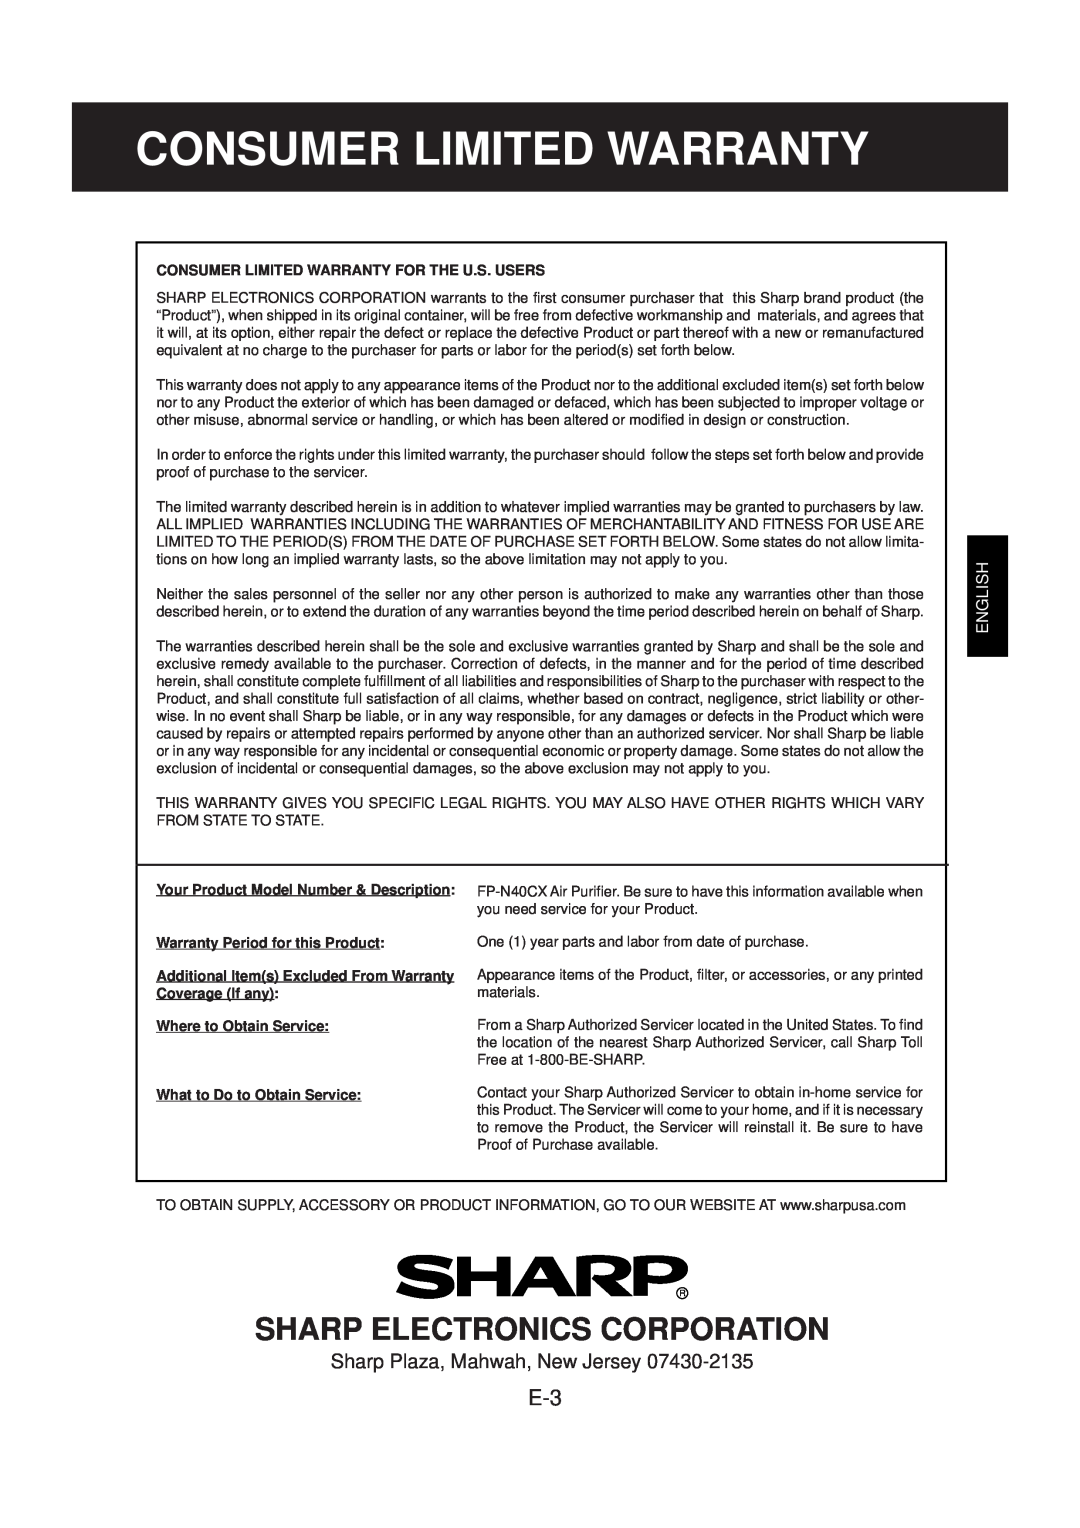 Sharp FP-N40CX Consumer Limited Warranty, Sharp Electronics Corporation, English, Warranty Period for this Product 